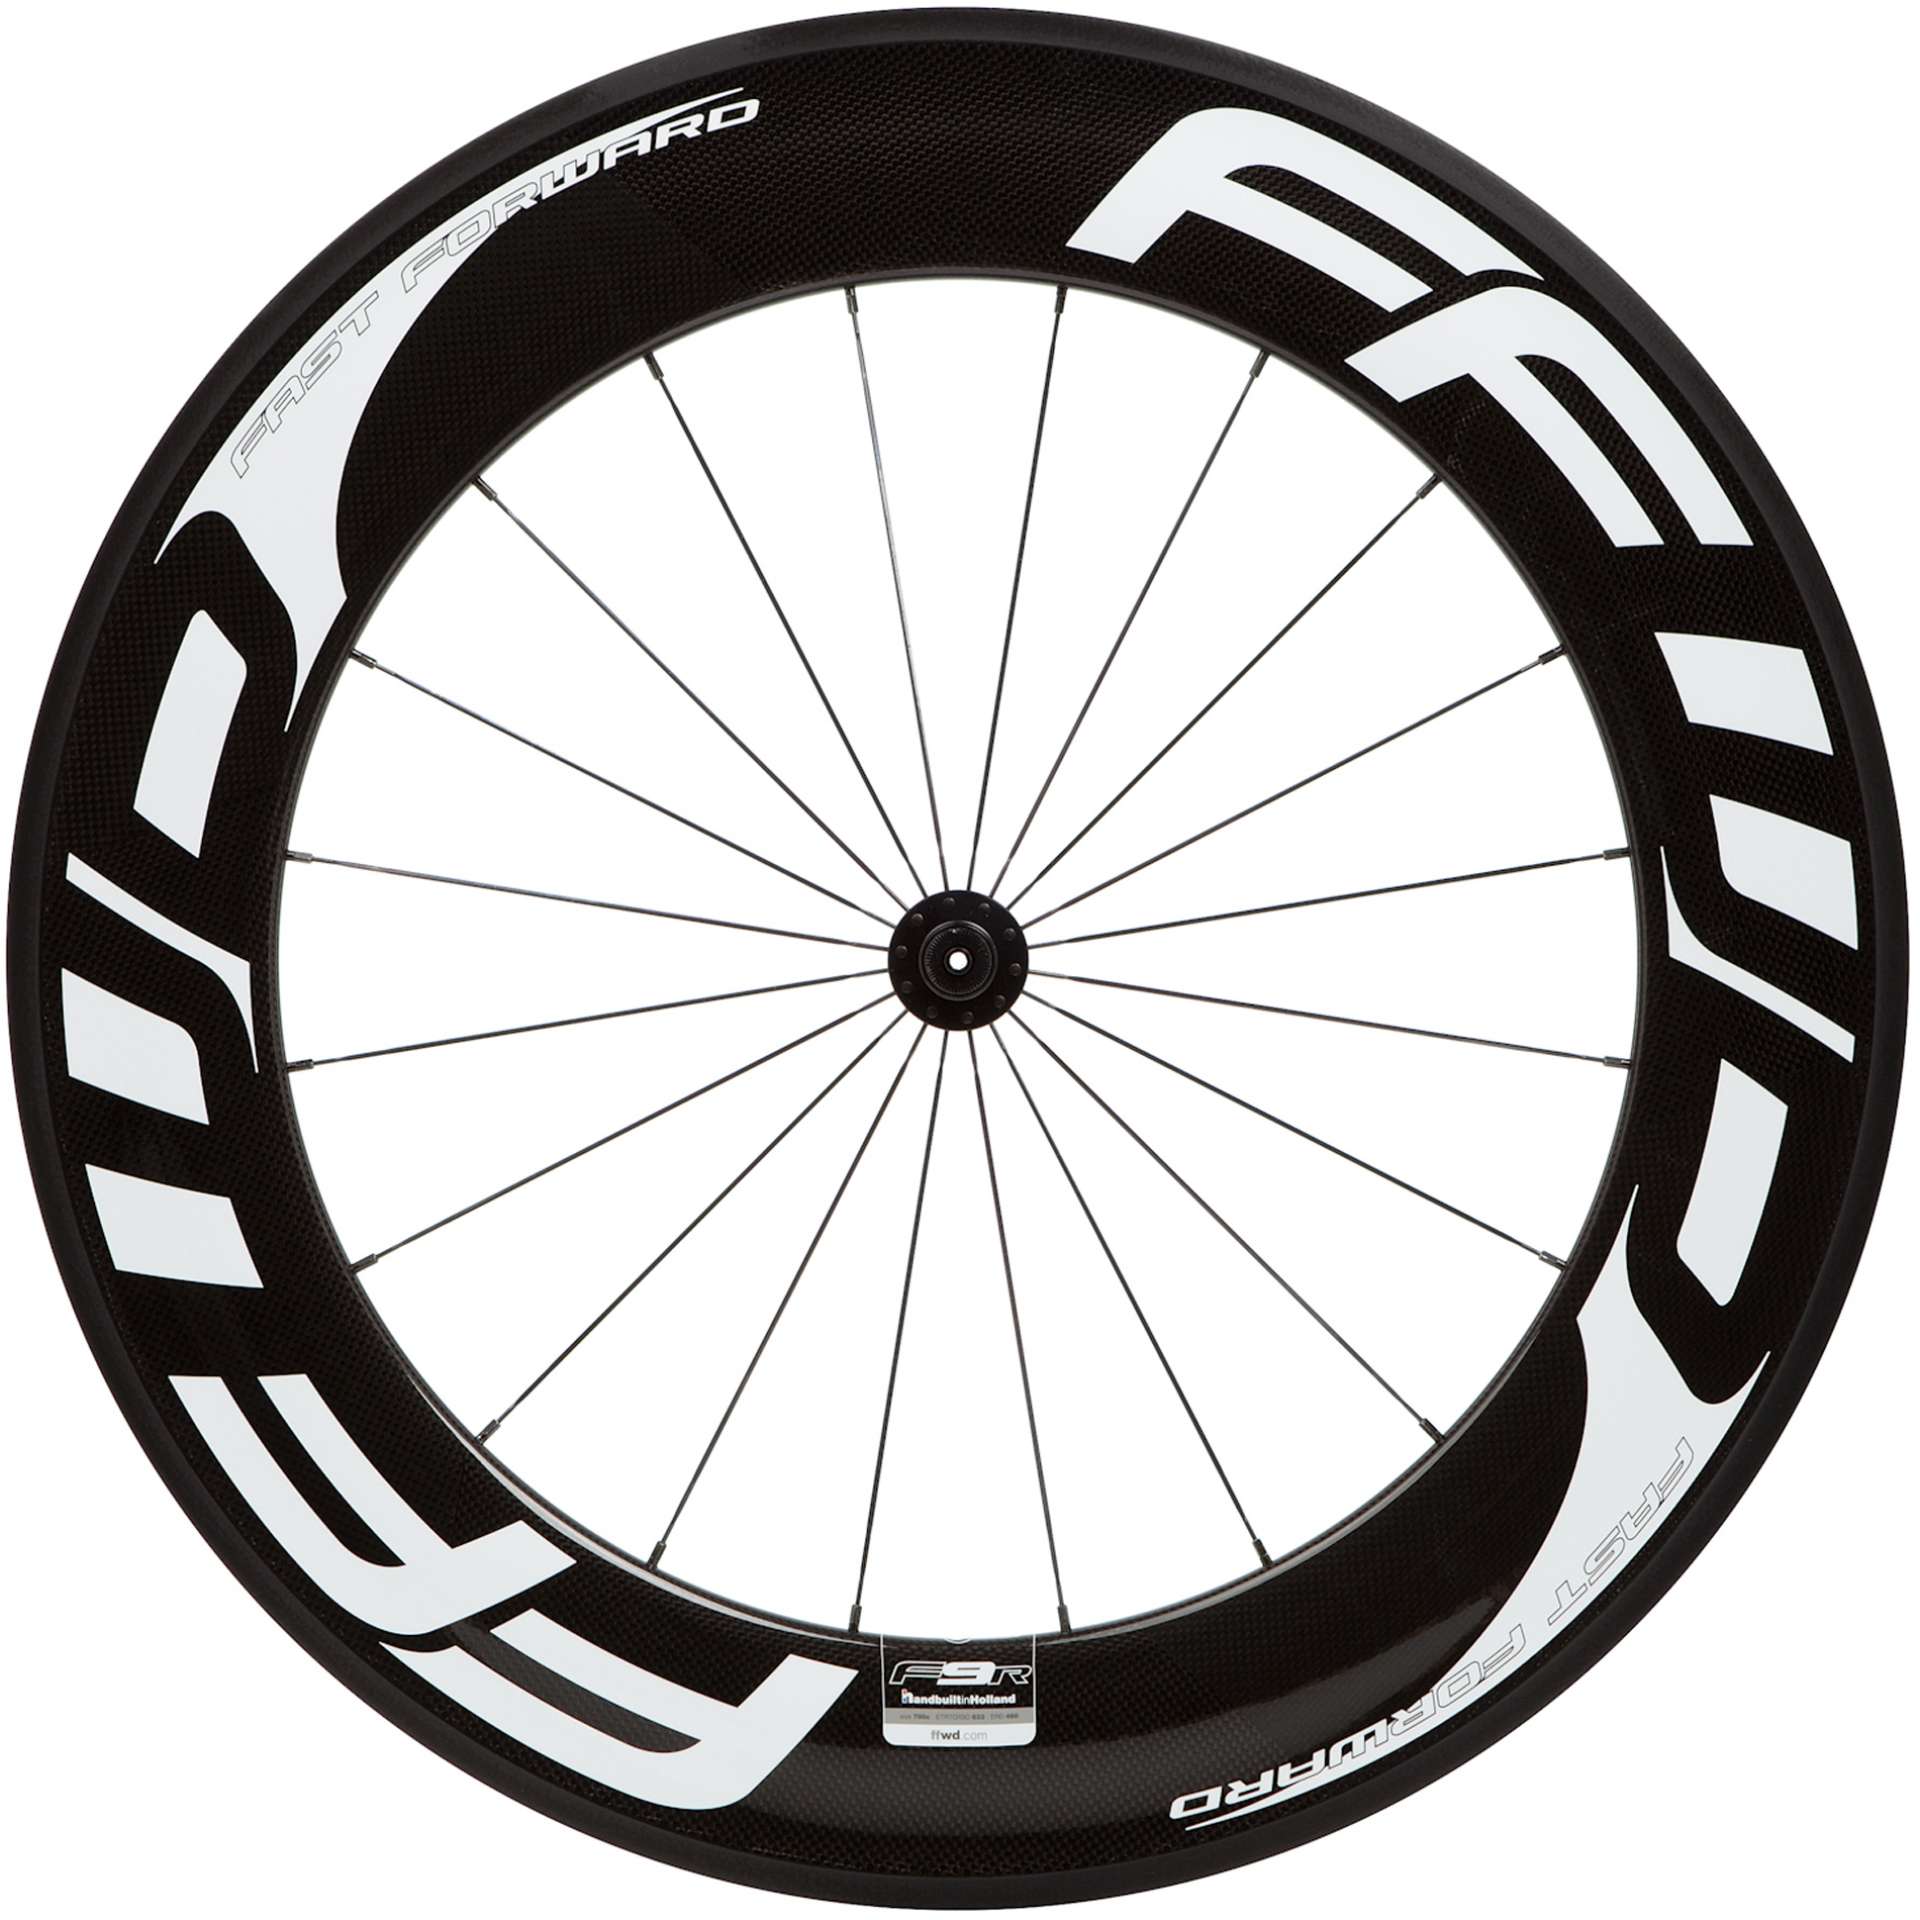 Fast Forward F9R Full Carbon Clincher Wielset Wit met DT Swiss 240S Naaf